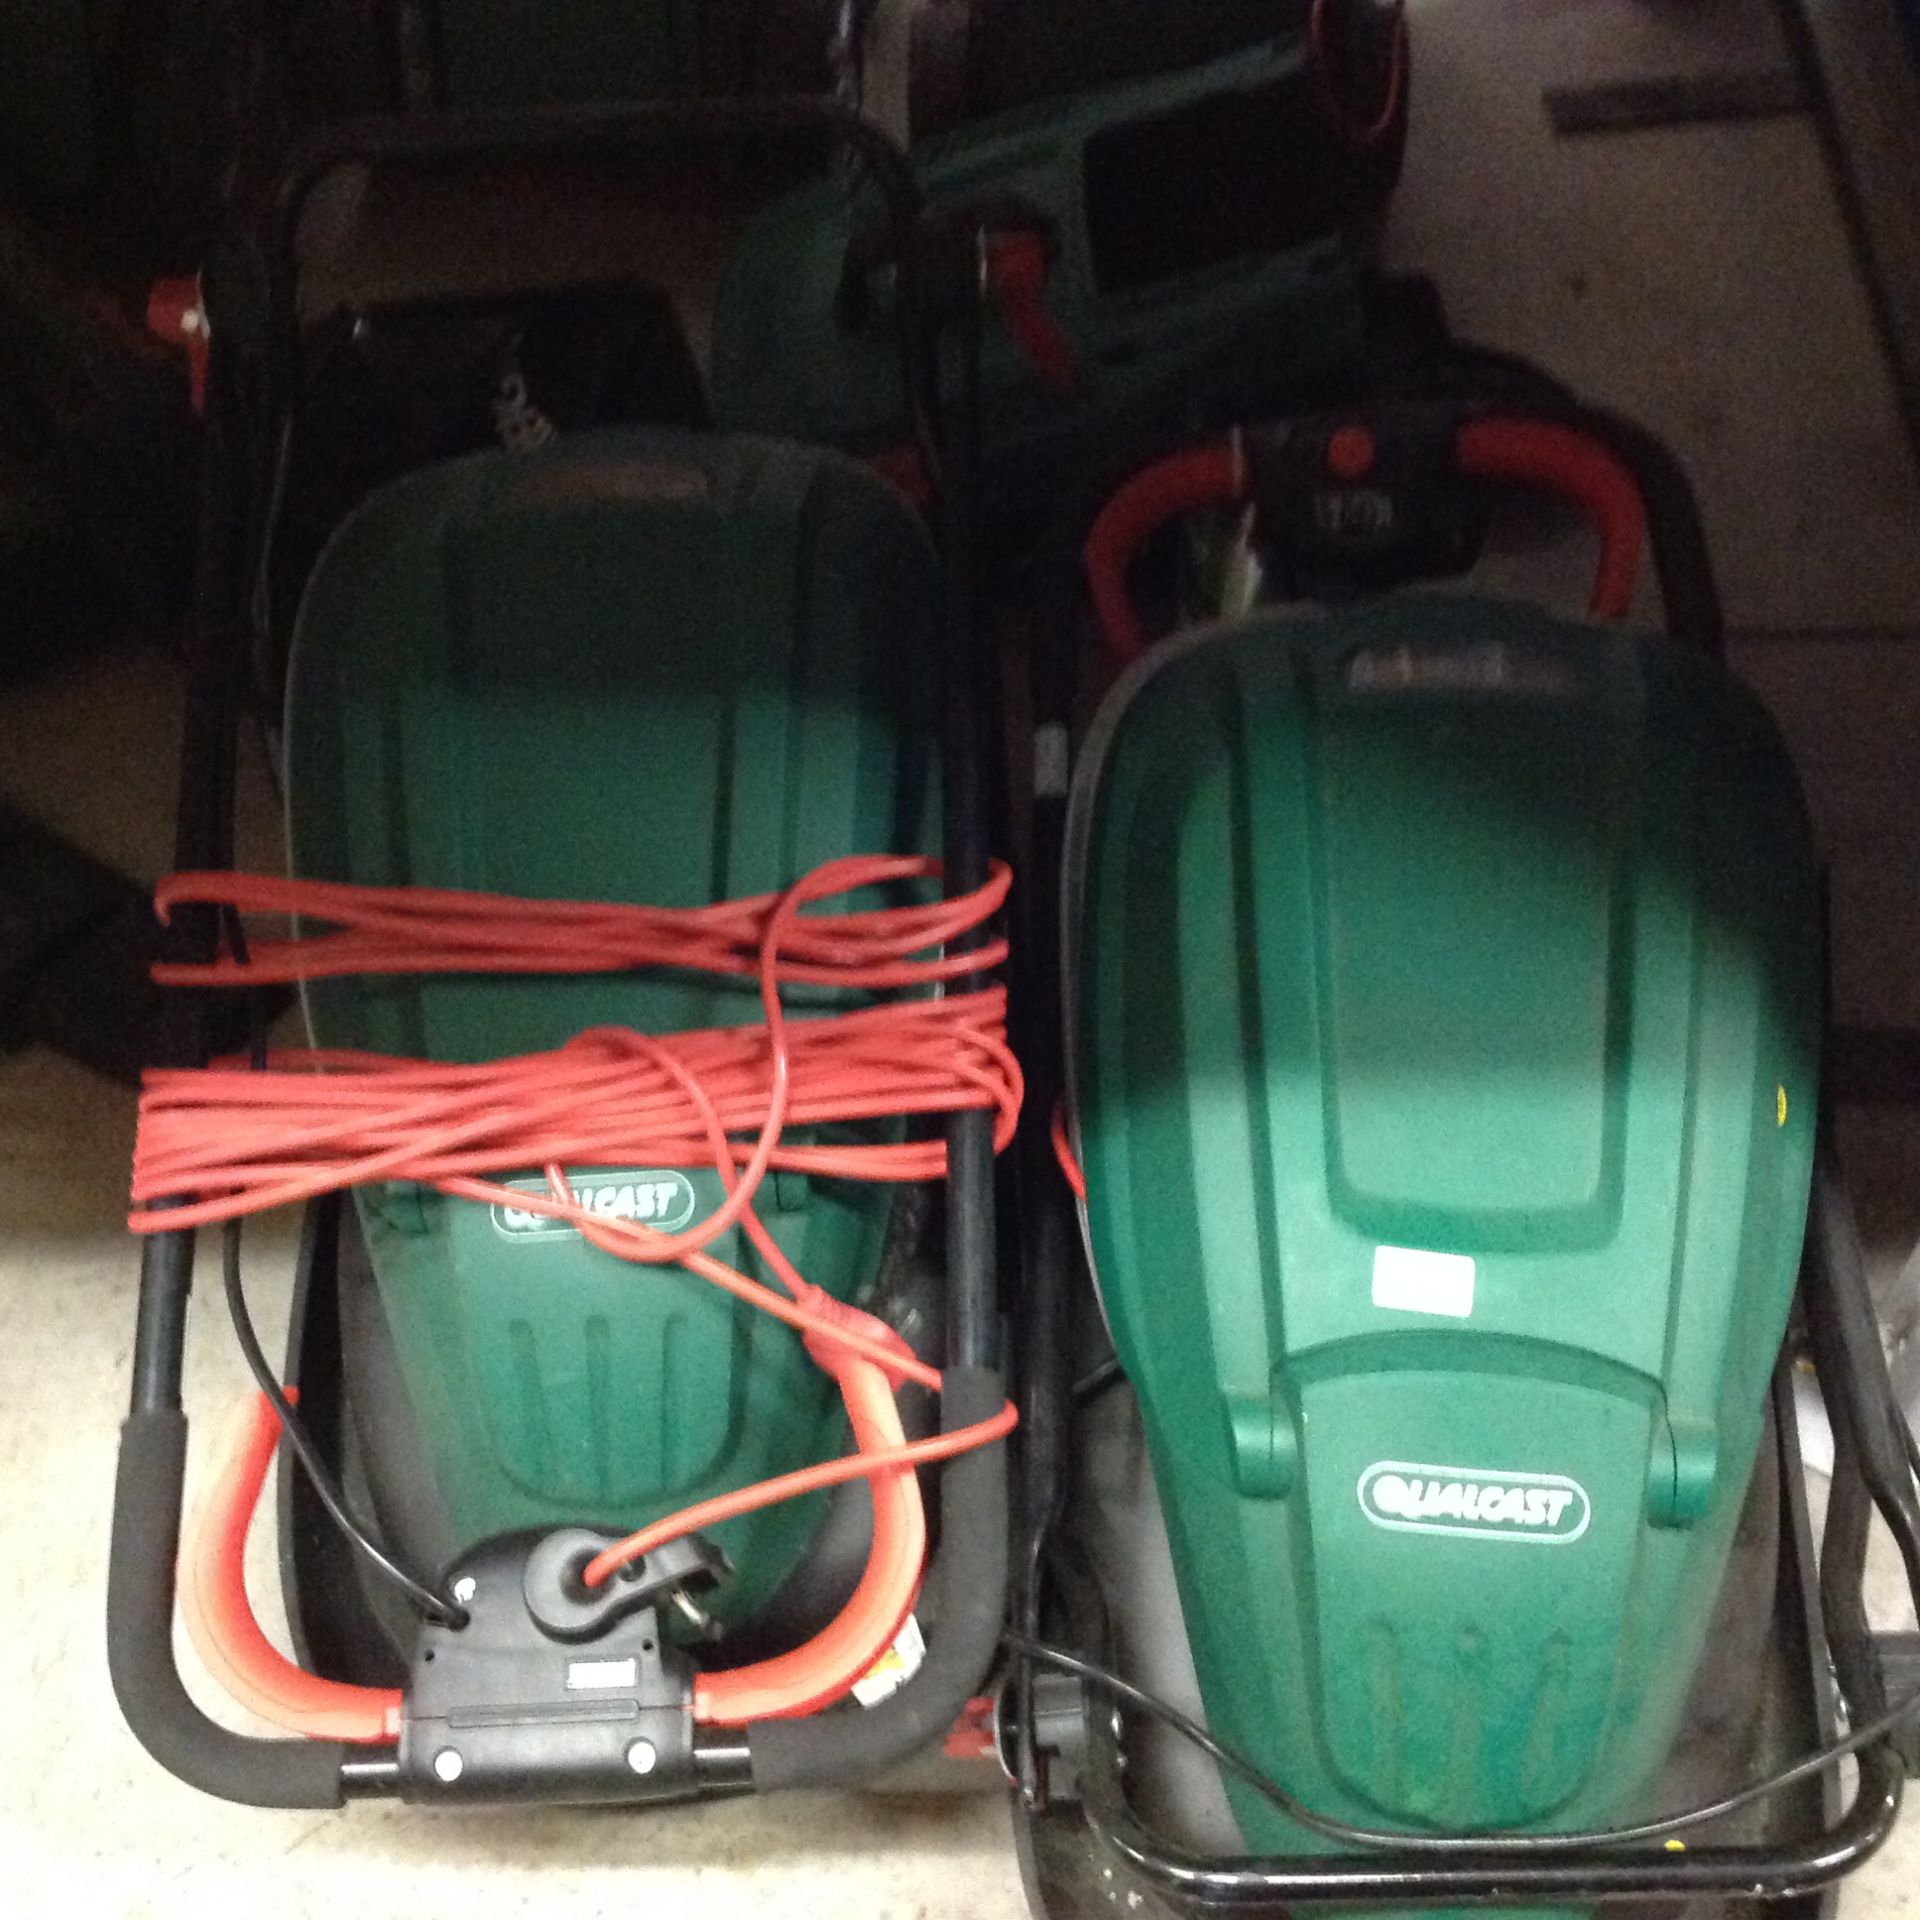 2 x Qualcast 1500w hover lawnmowers